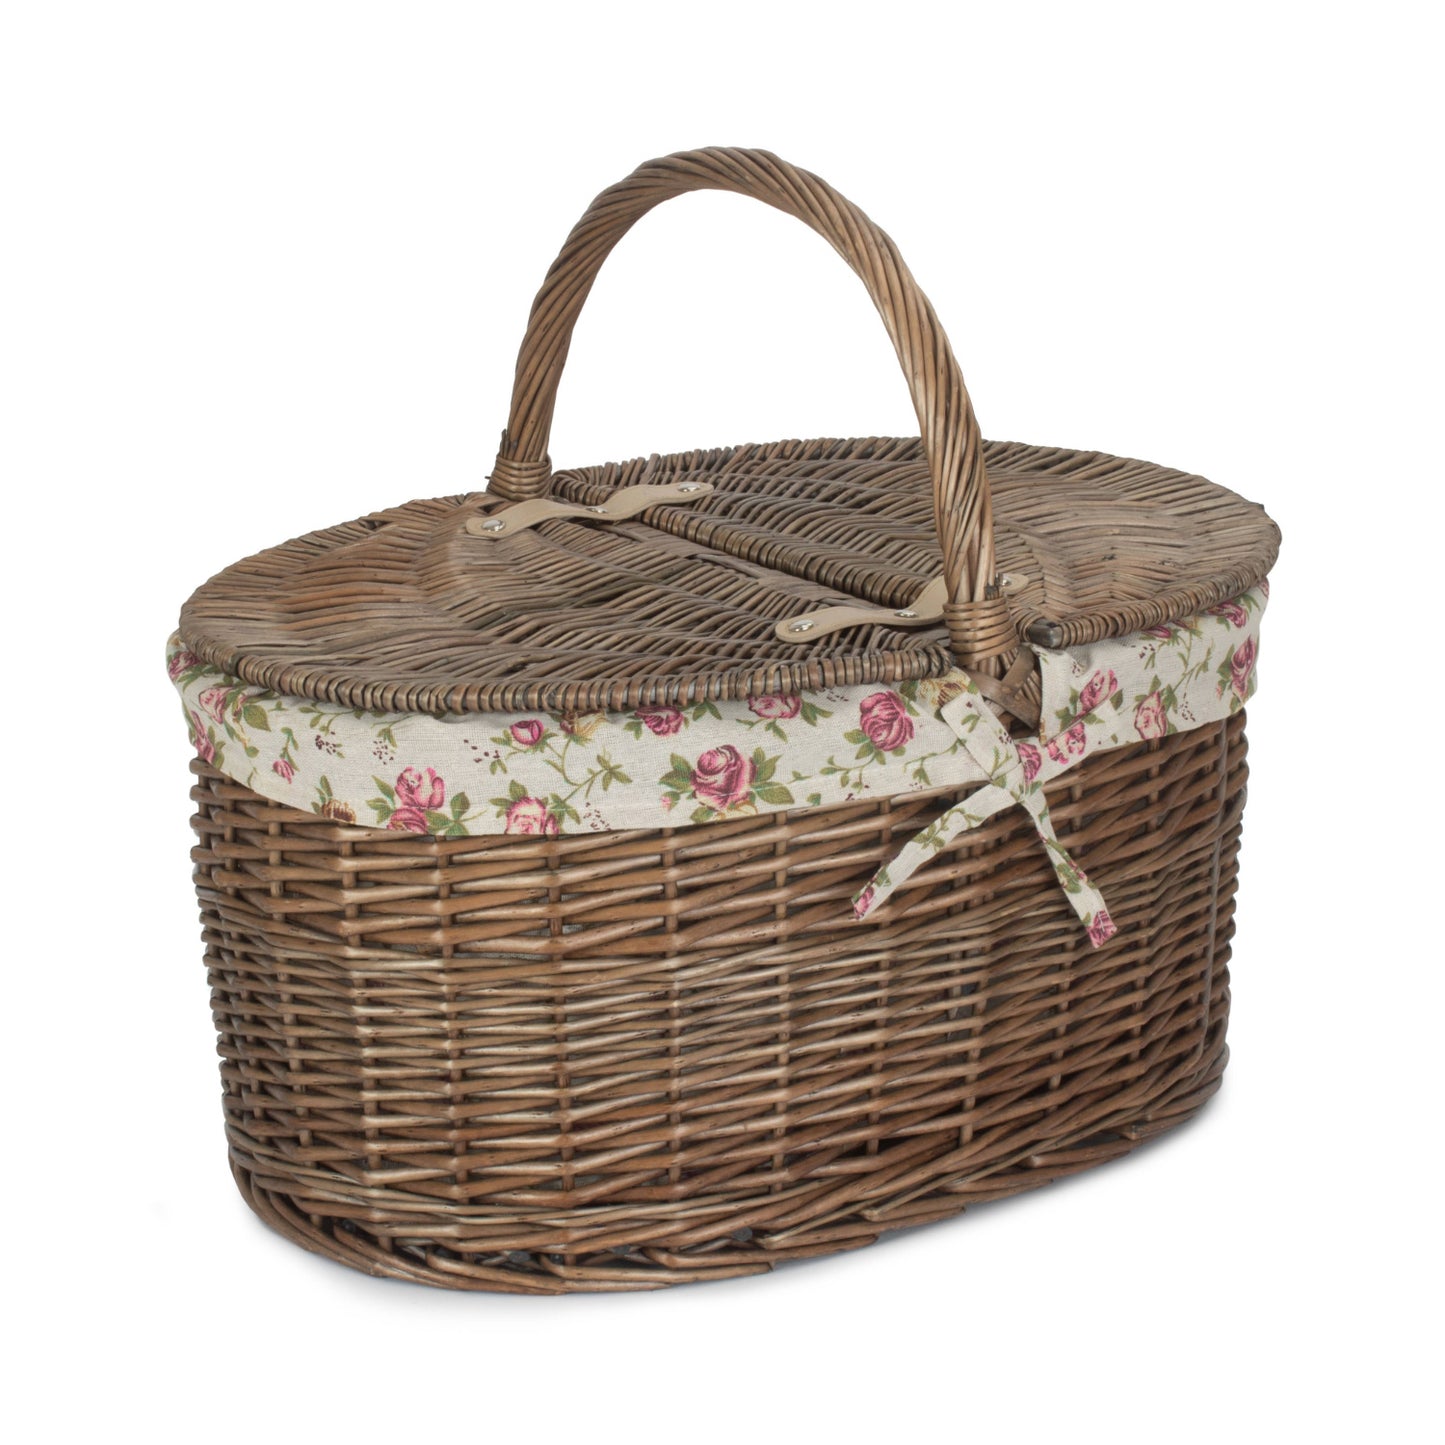 Deep Antique Wash Oval Picnic Basket With Garden Rose Lining